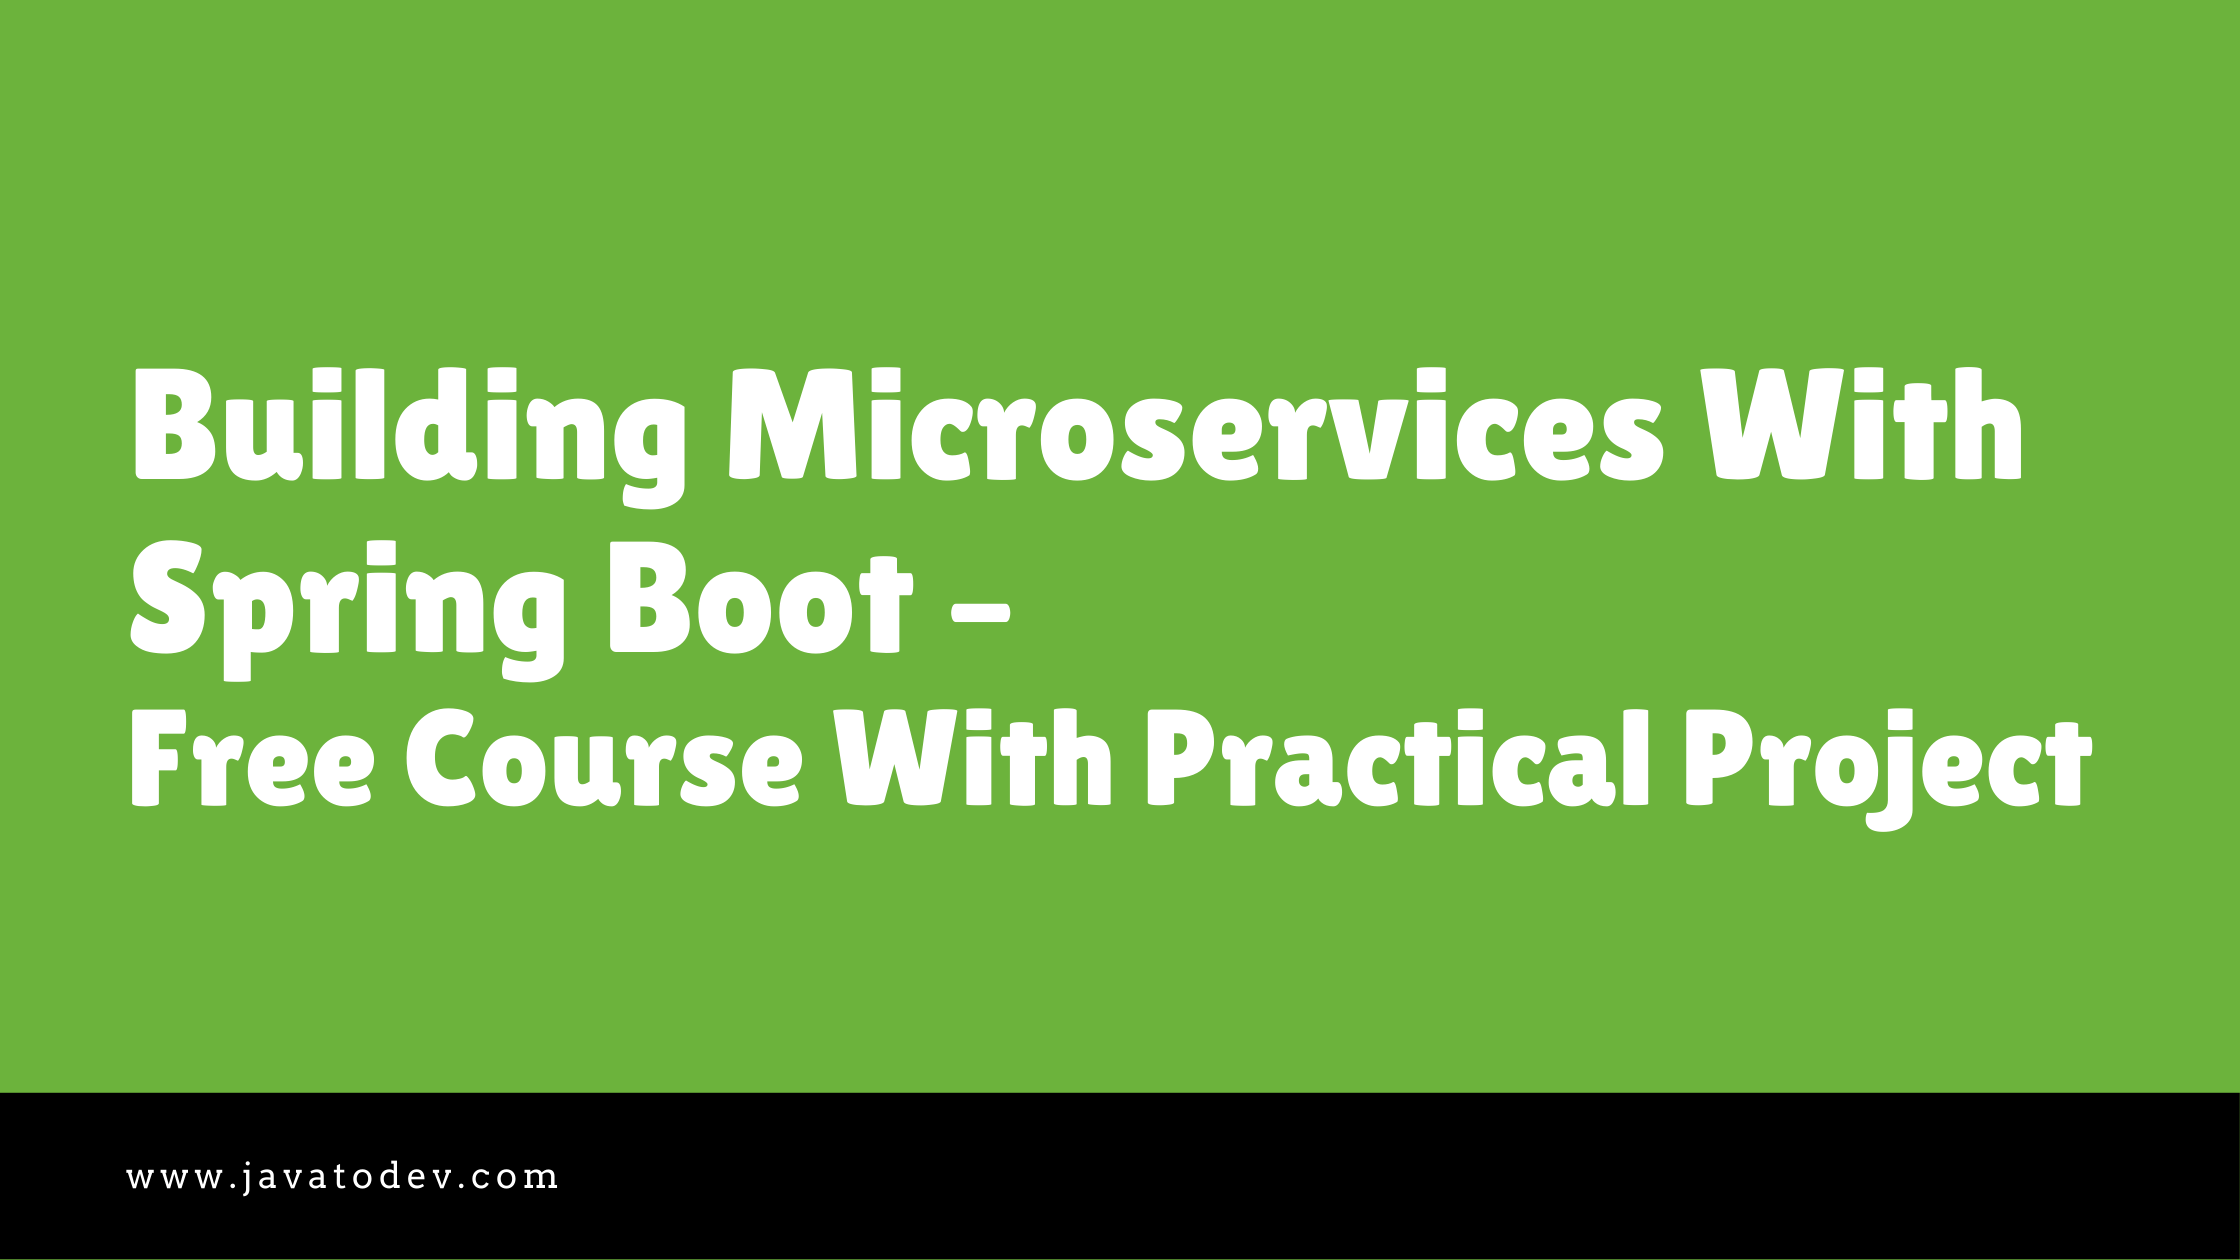 Building Microservices With Spring Boot - Free Course With Practical Project